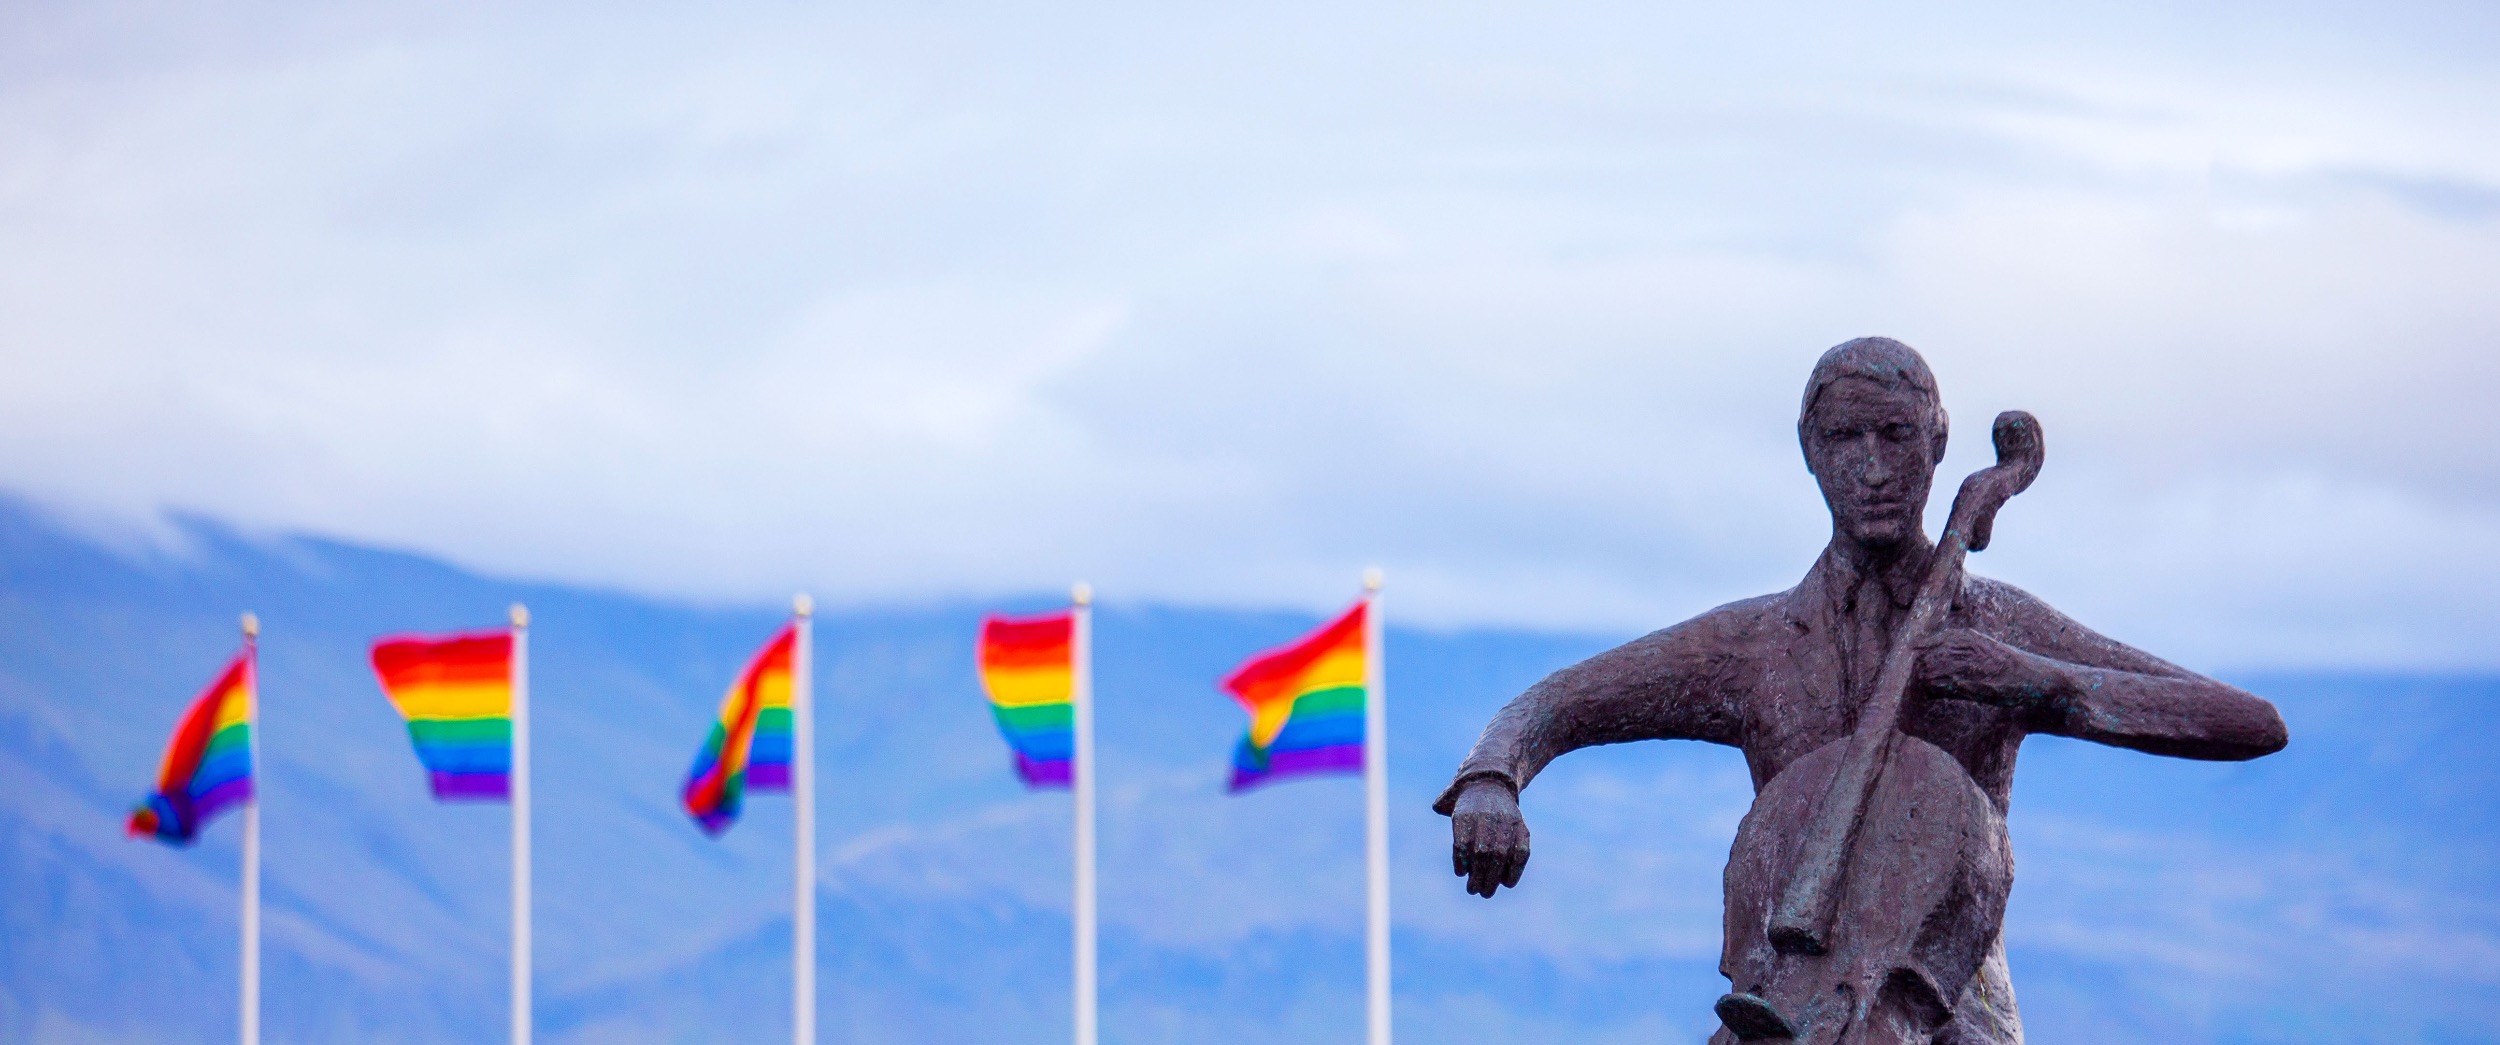 cellist statue with rainbow pride flags in background